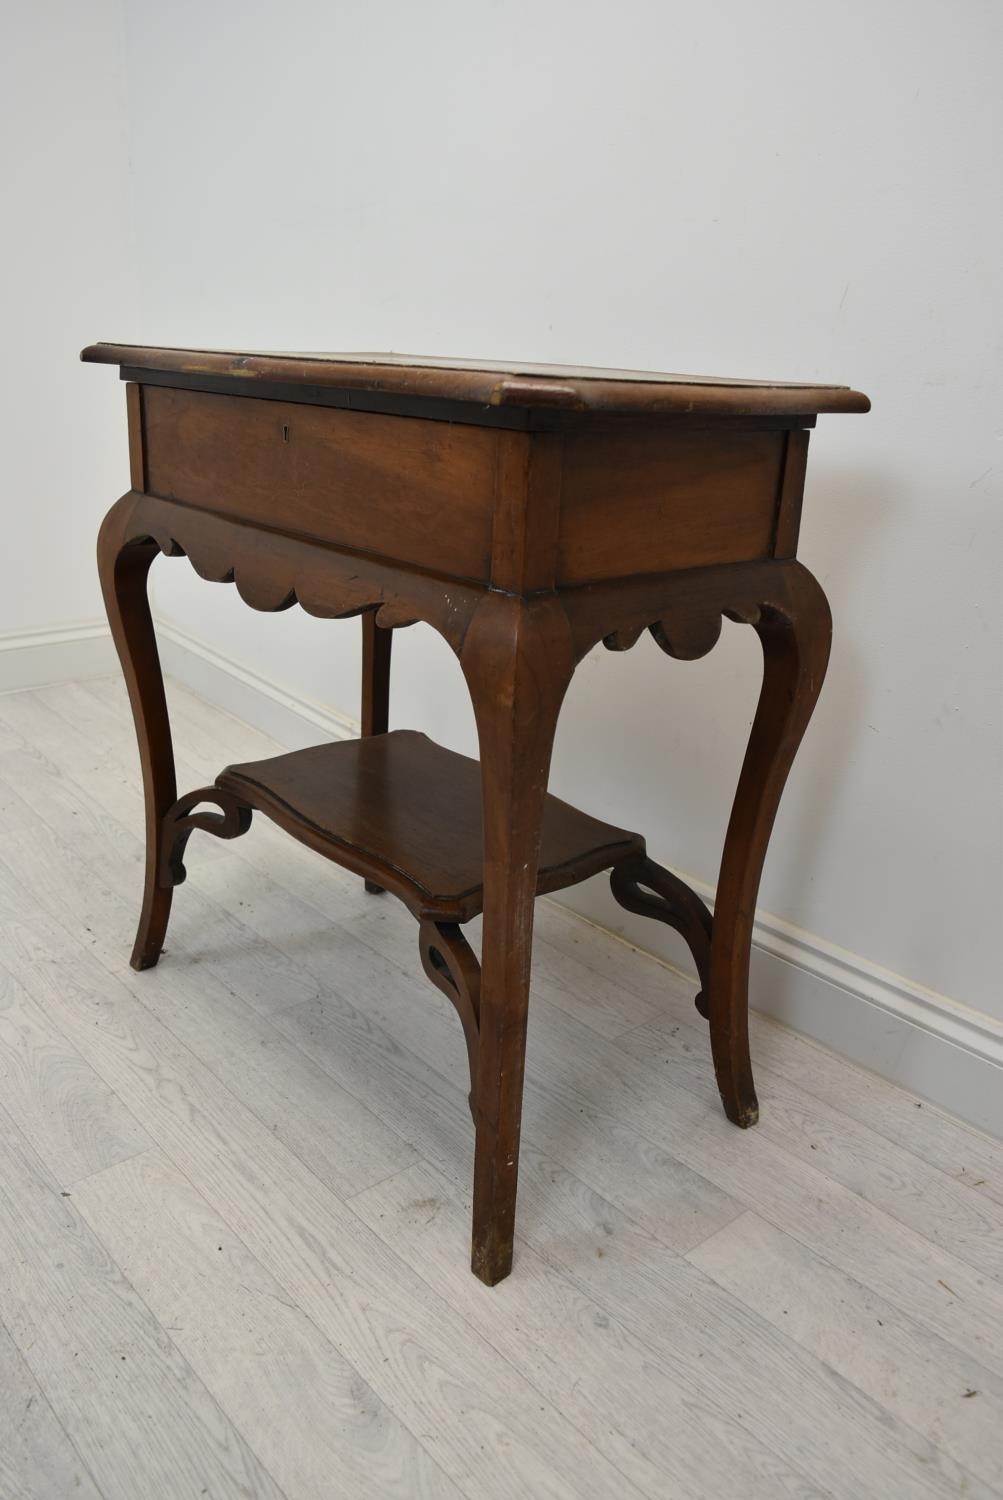 Work table, C.1900 mahogany. H.77 W.73 D.43 cm. - Image 3 of 5